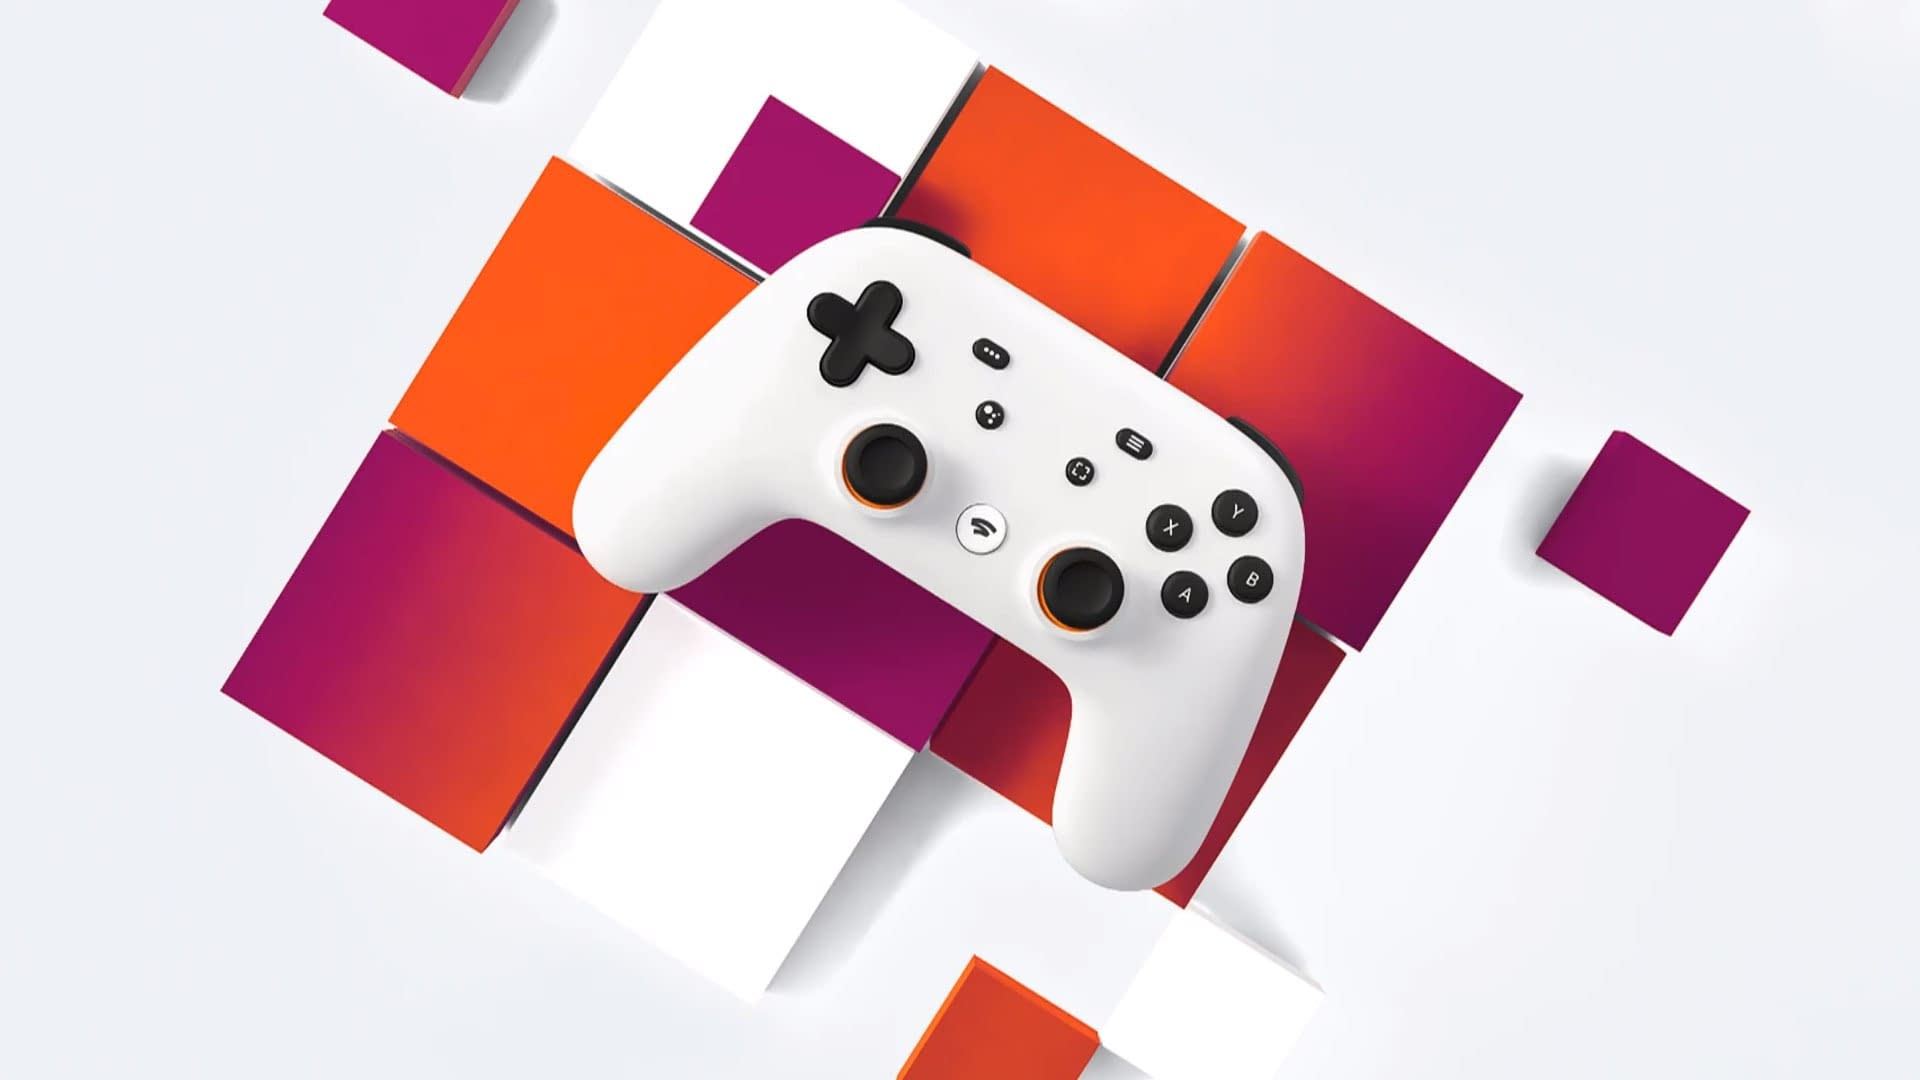 Google Stadia released a Free Game Before Ending Service